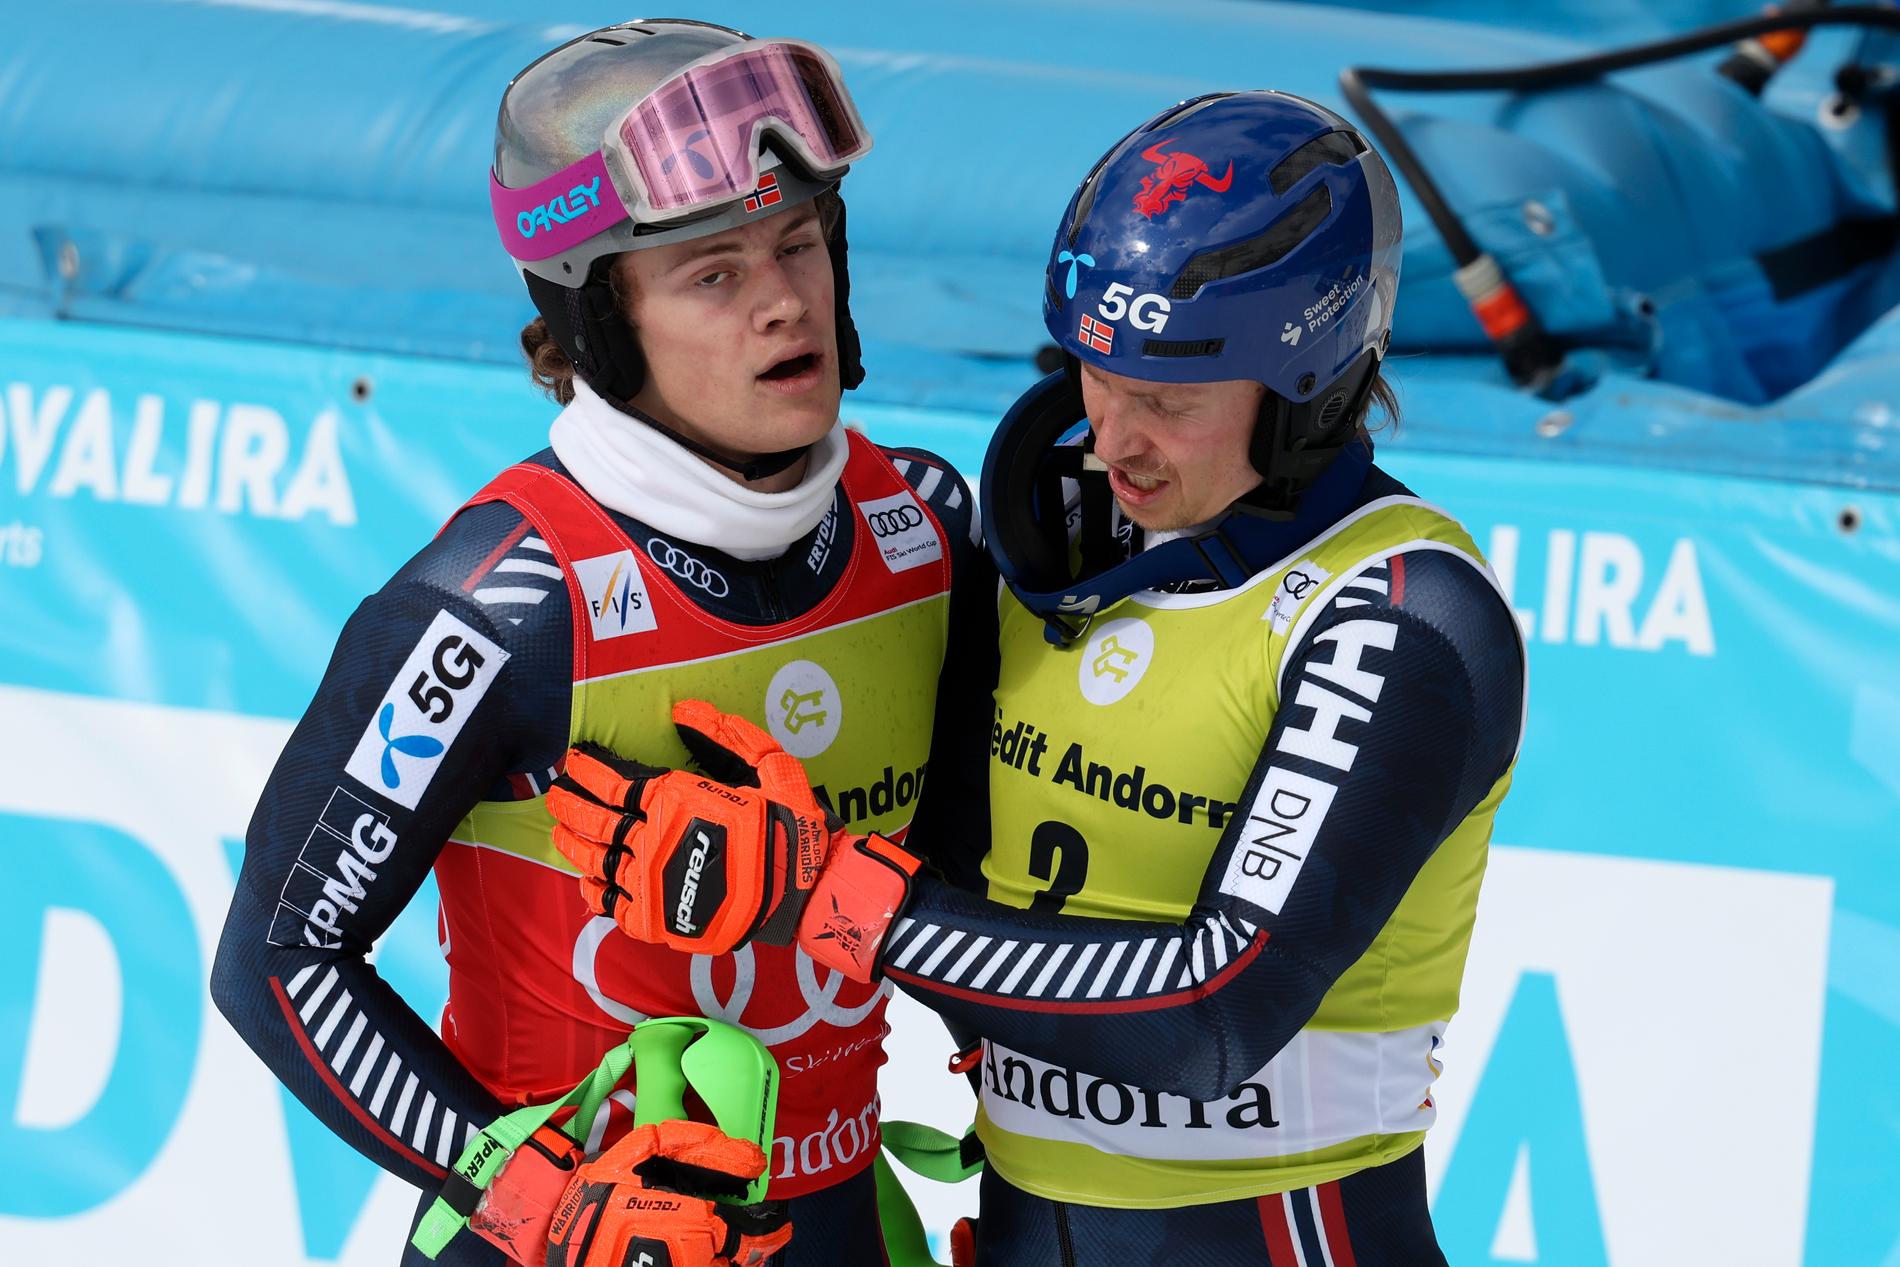 Alpine skiing: Henrik Kristoffersen talks about the alpine skiing environment after Lukas Clutches posted: – There is a void